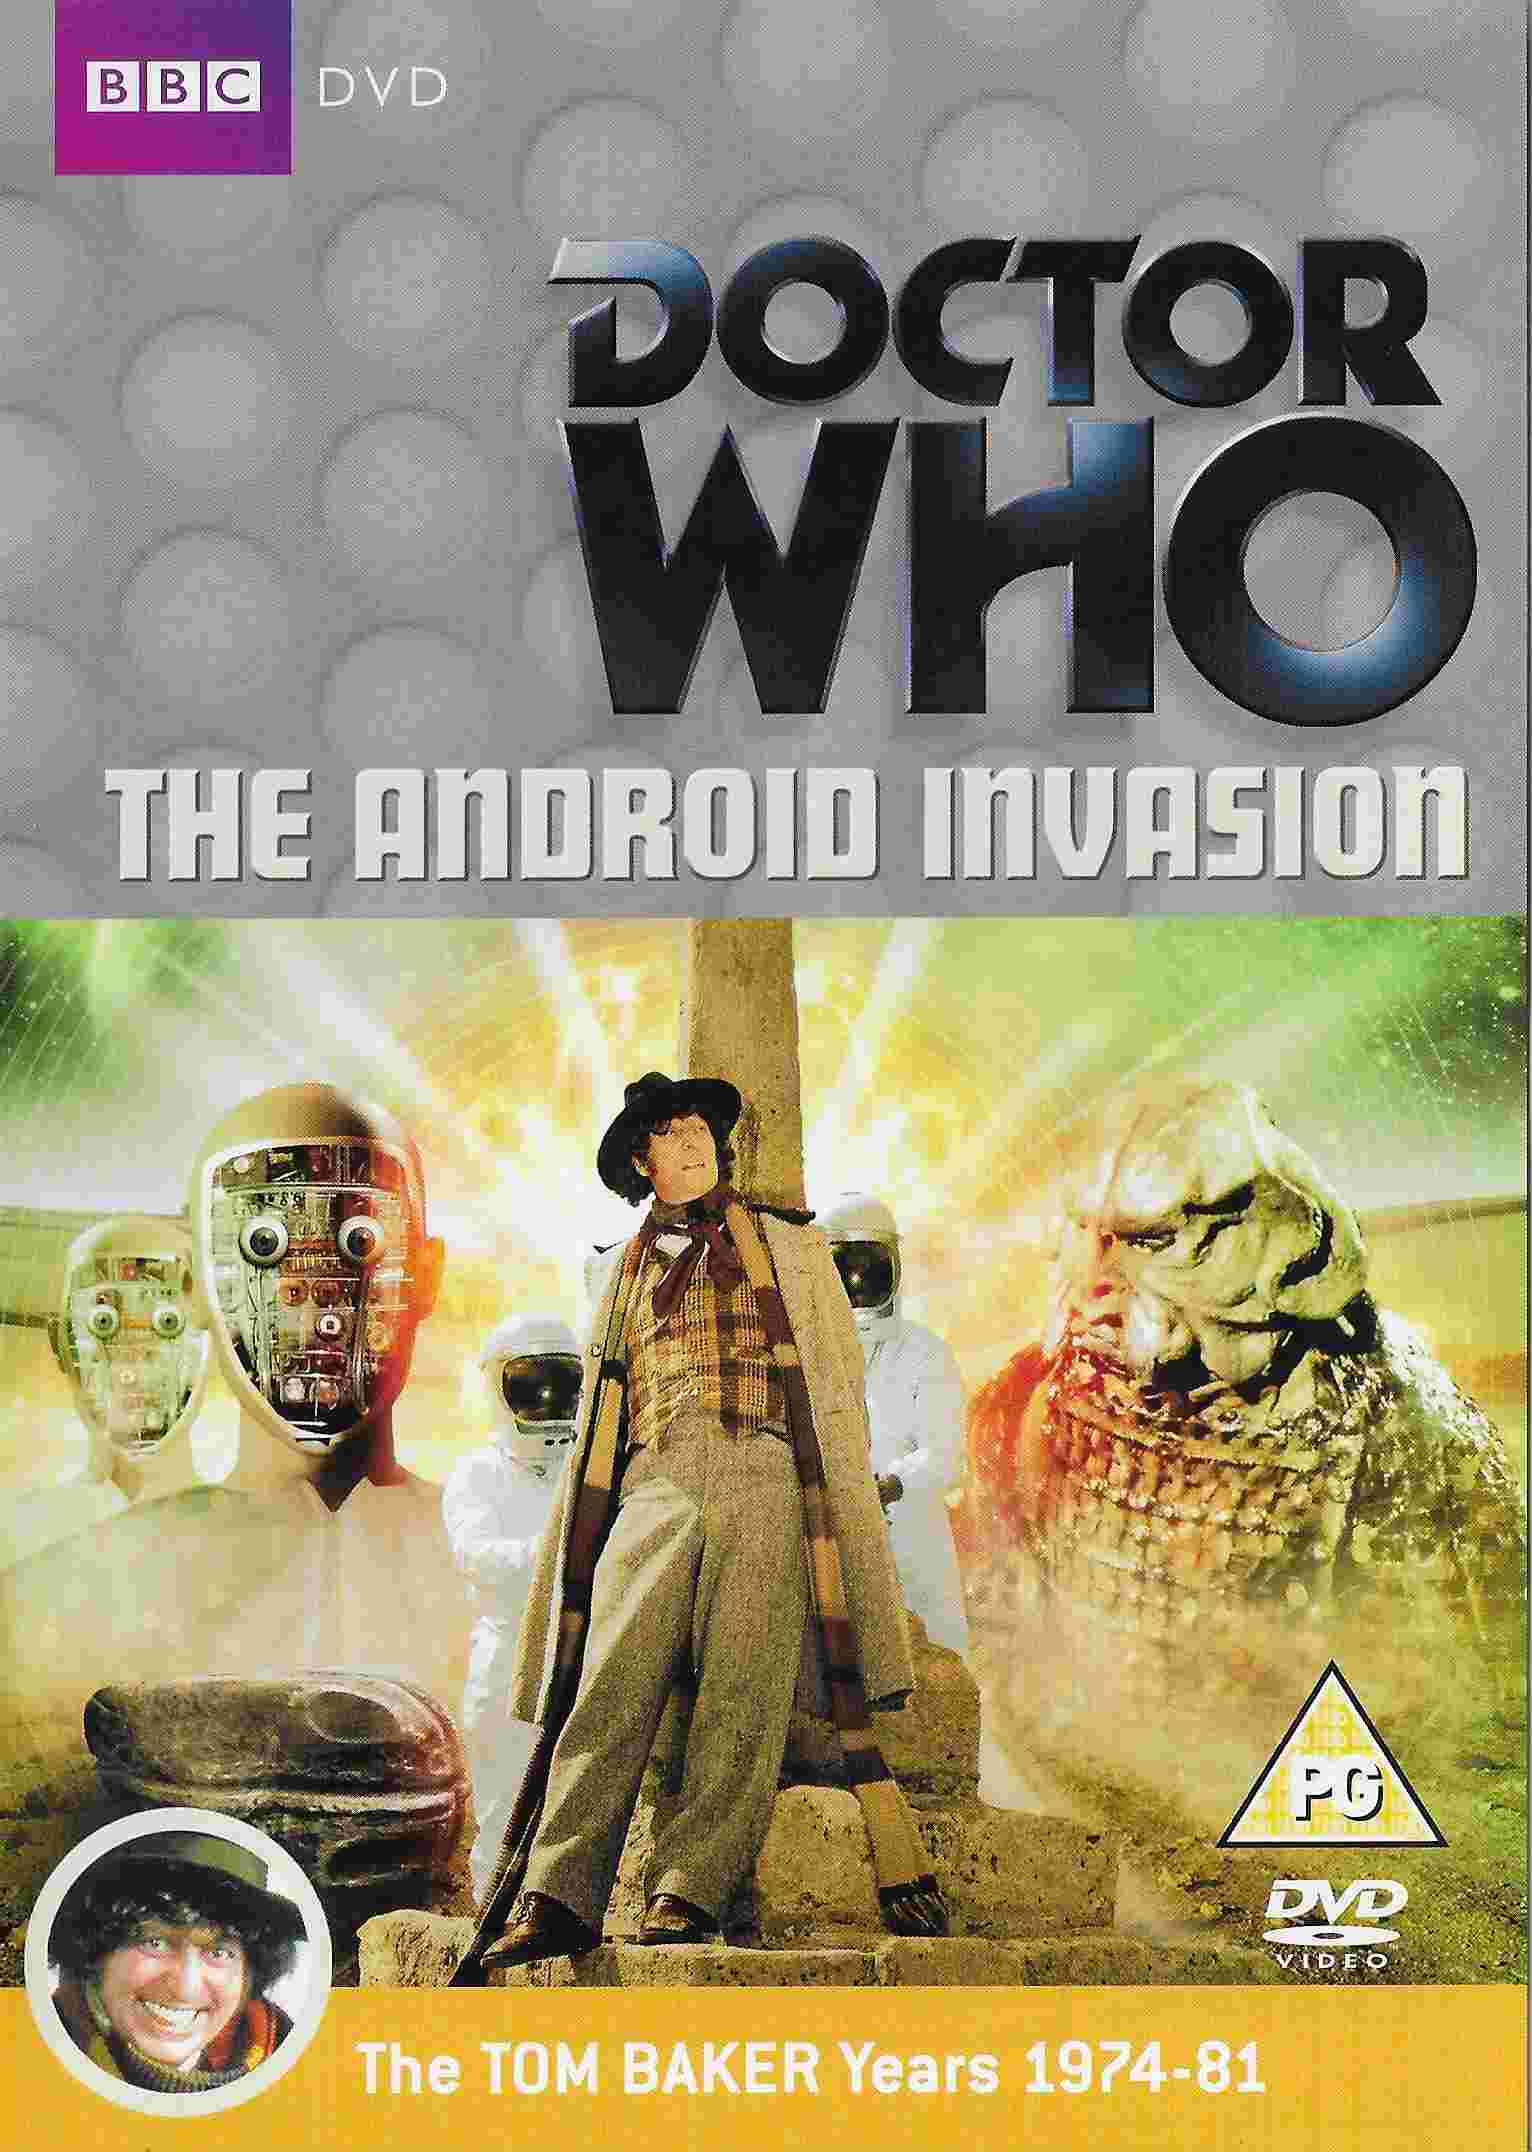 Picture of BBCDVD 3376B Doctor Who - The android invasion by artist Terry Nation from the BBC dvds - Records and Tapes library